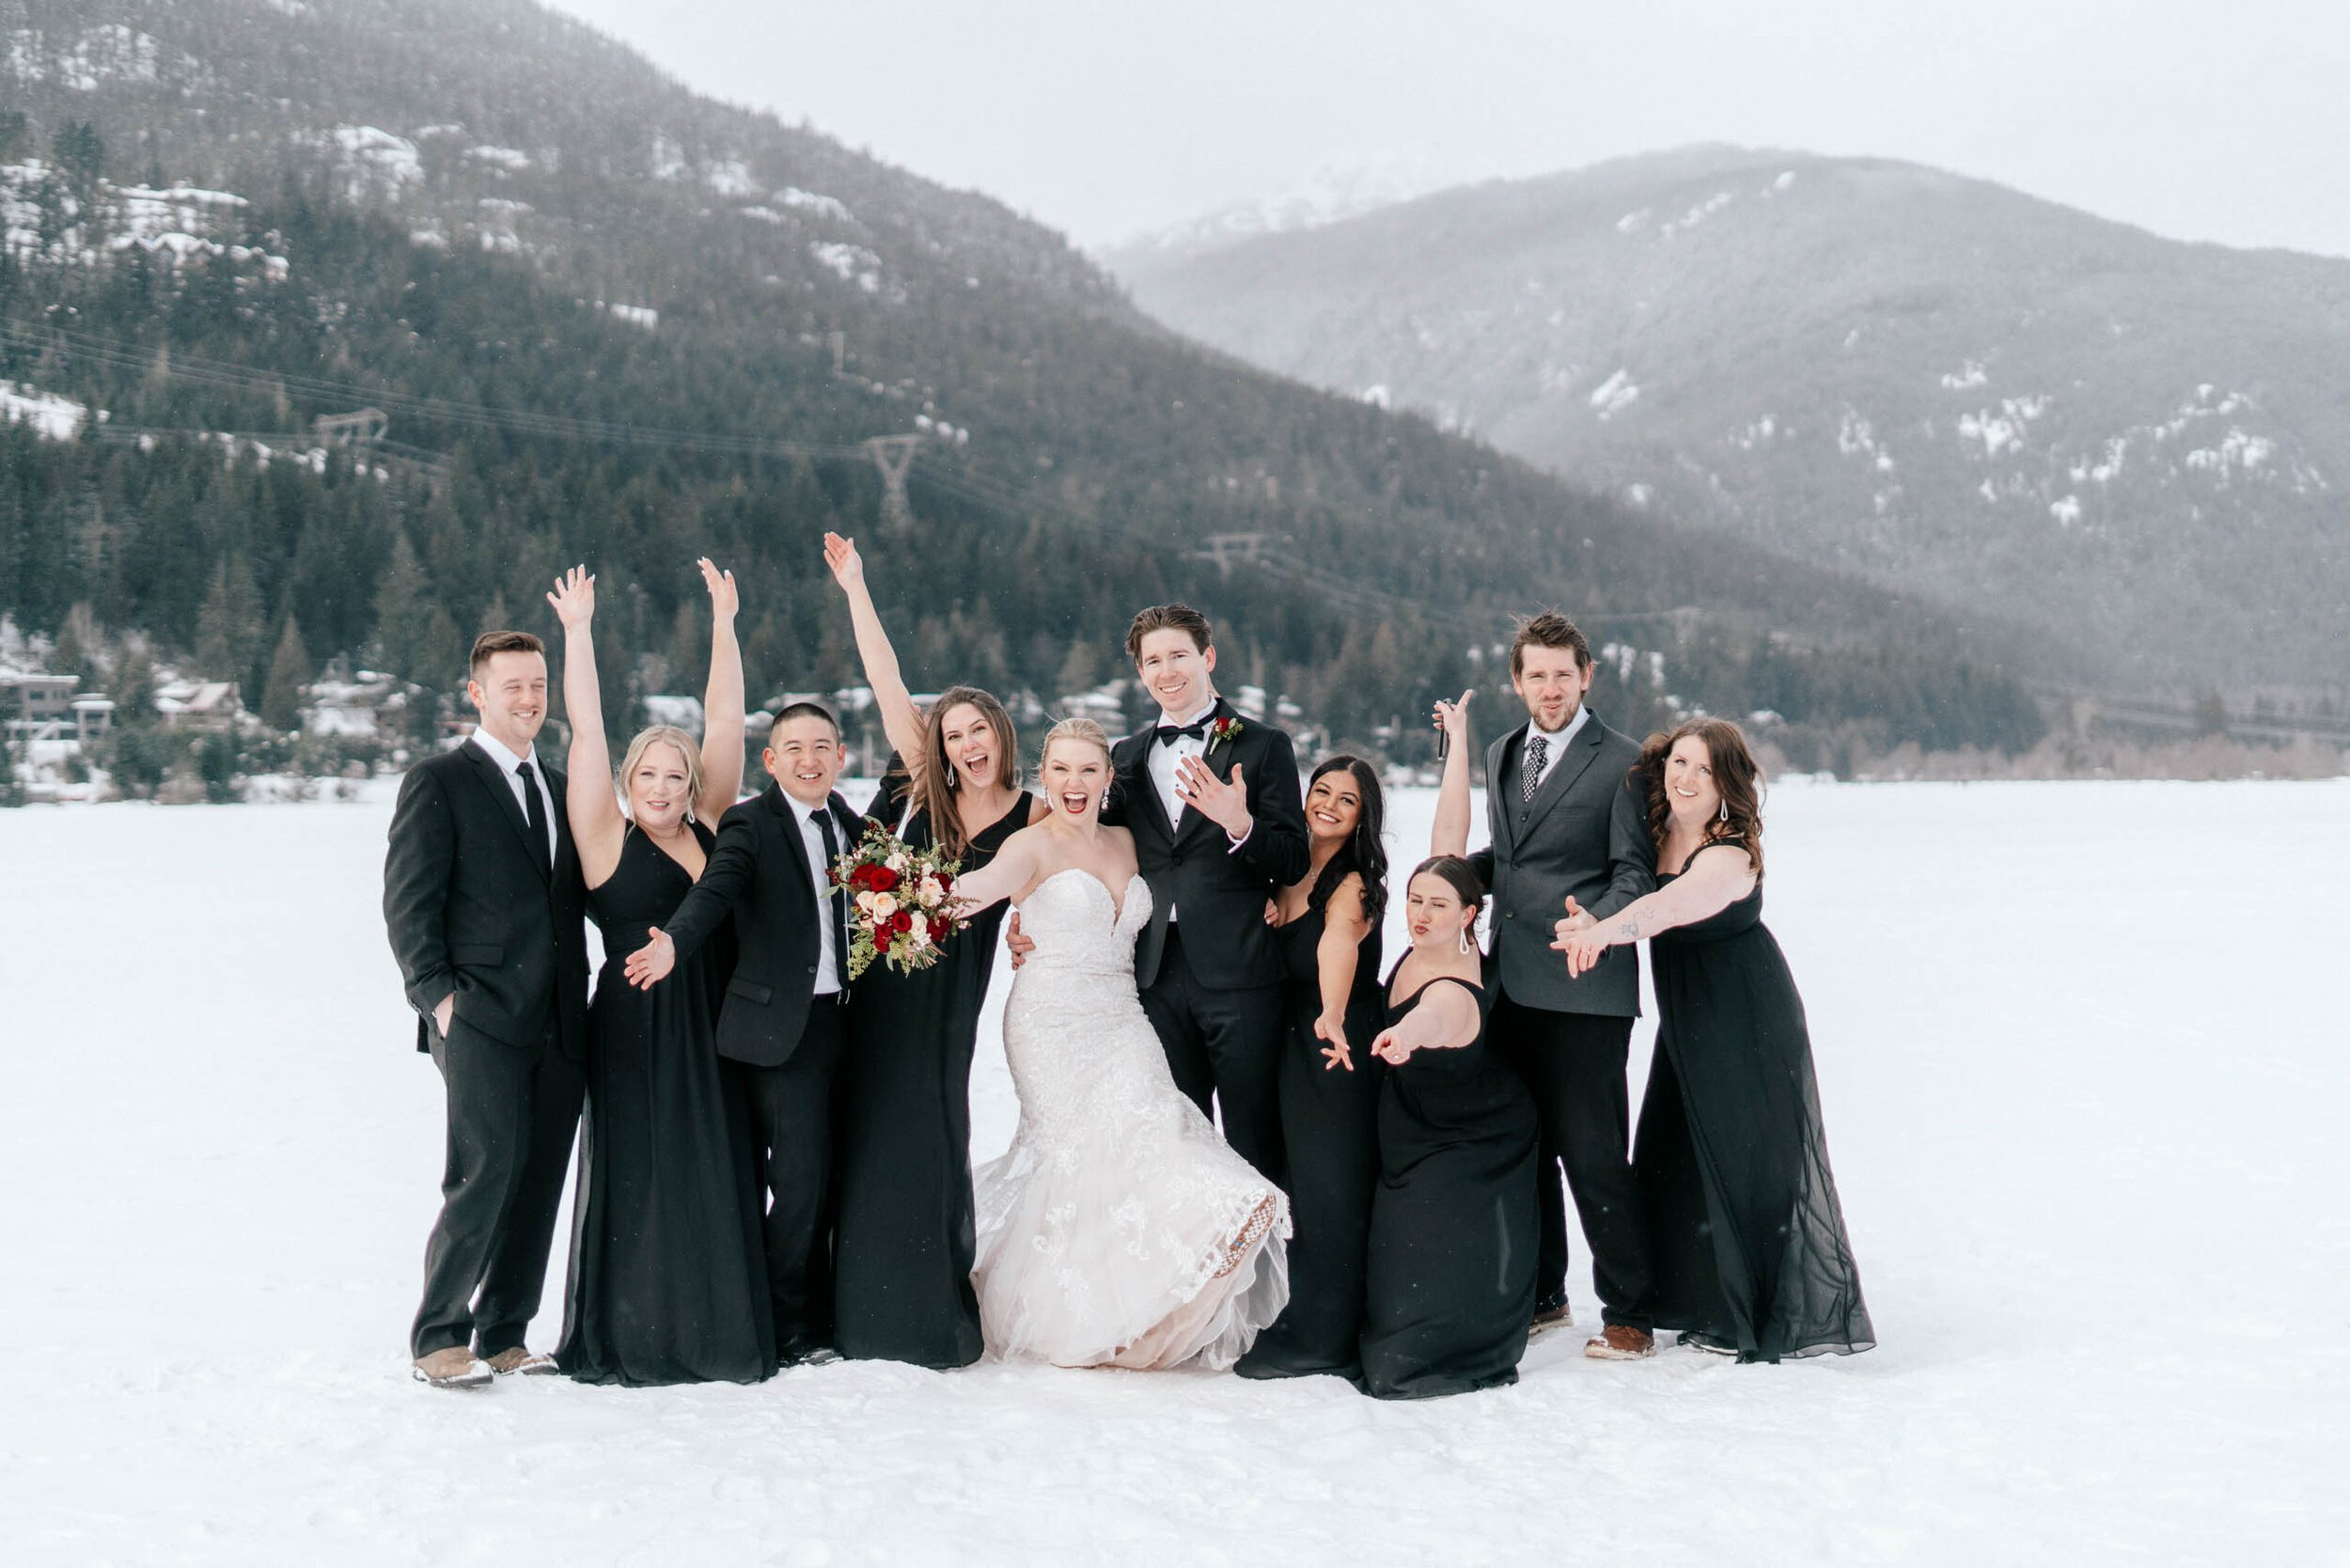 A wedding part cheers as they pose in the snow in Whistler, BC.